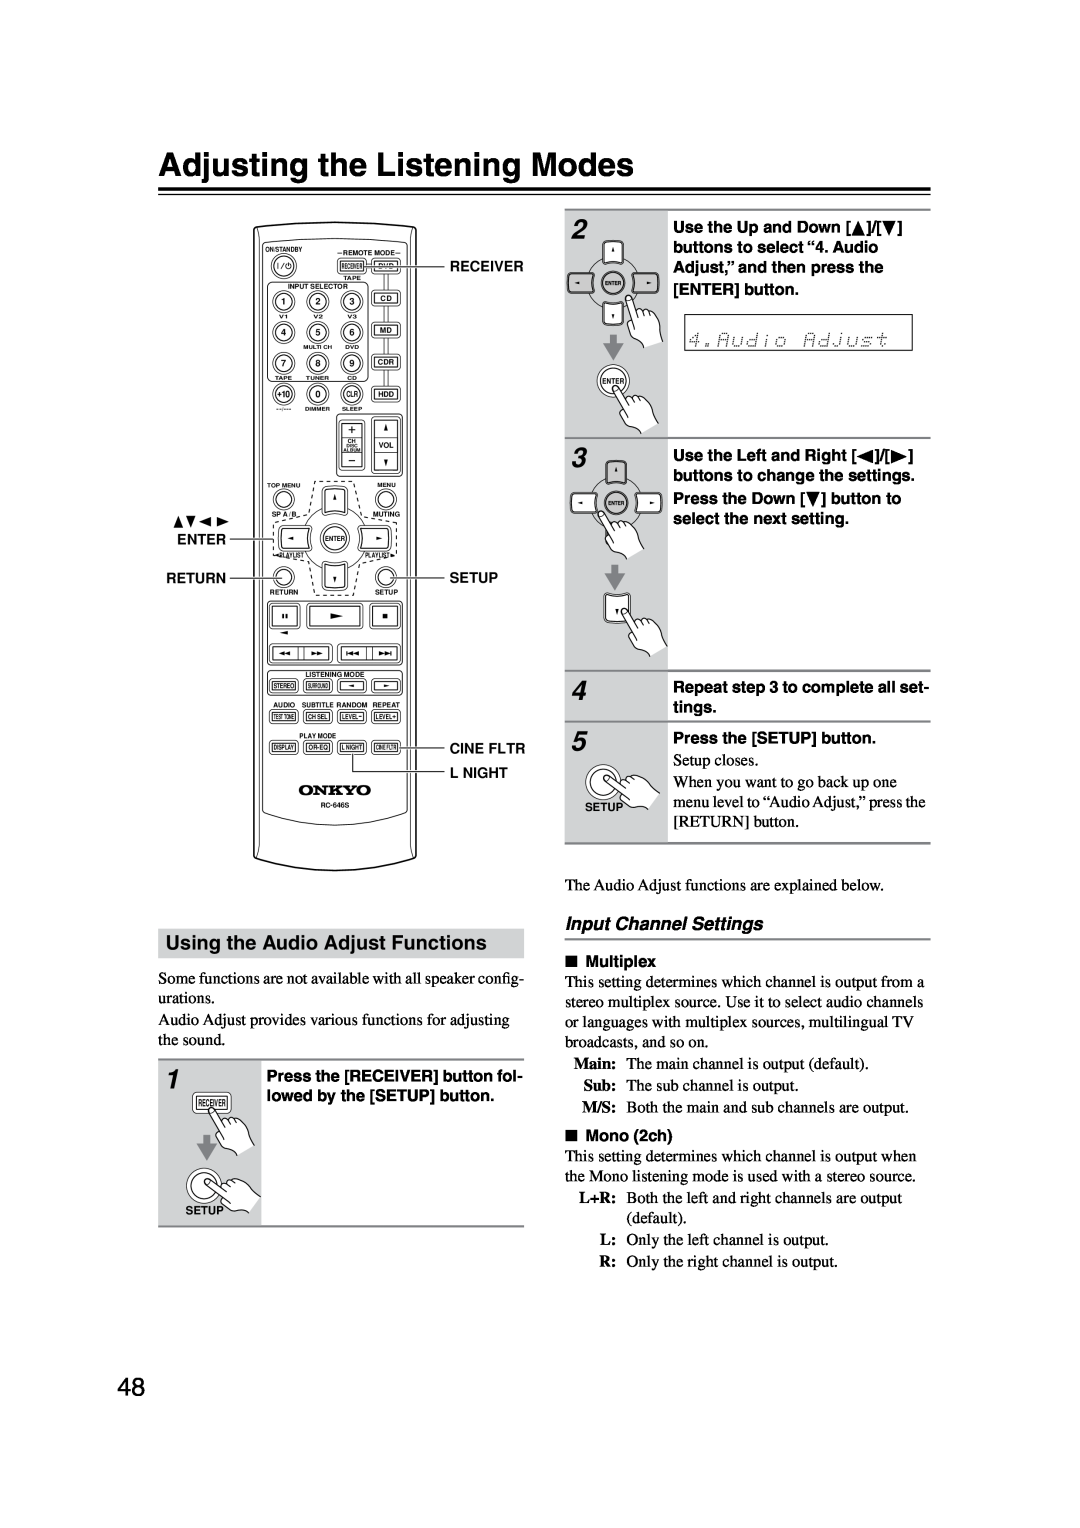 Onkyo HT-S590 instruction manual Adjusting the Listening Modes, Using the Audio Adjust Functions, Input Channel Settings 